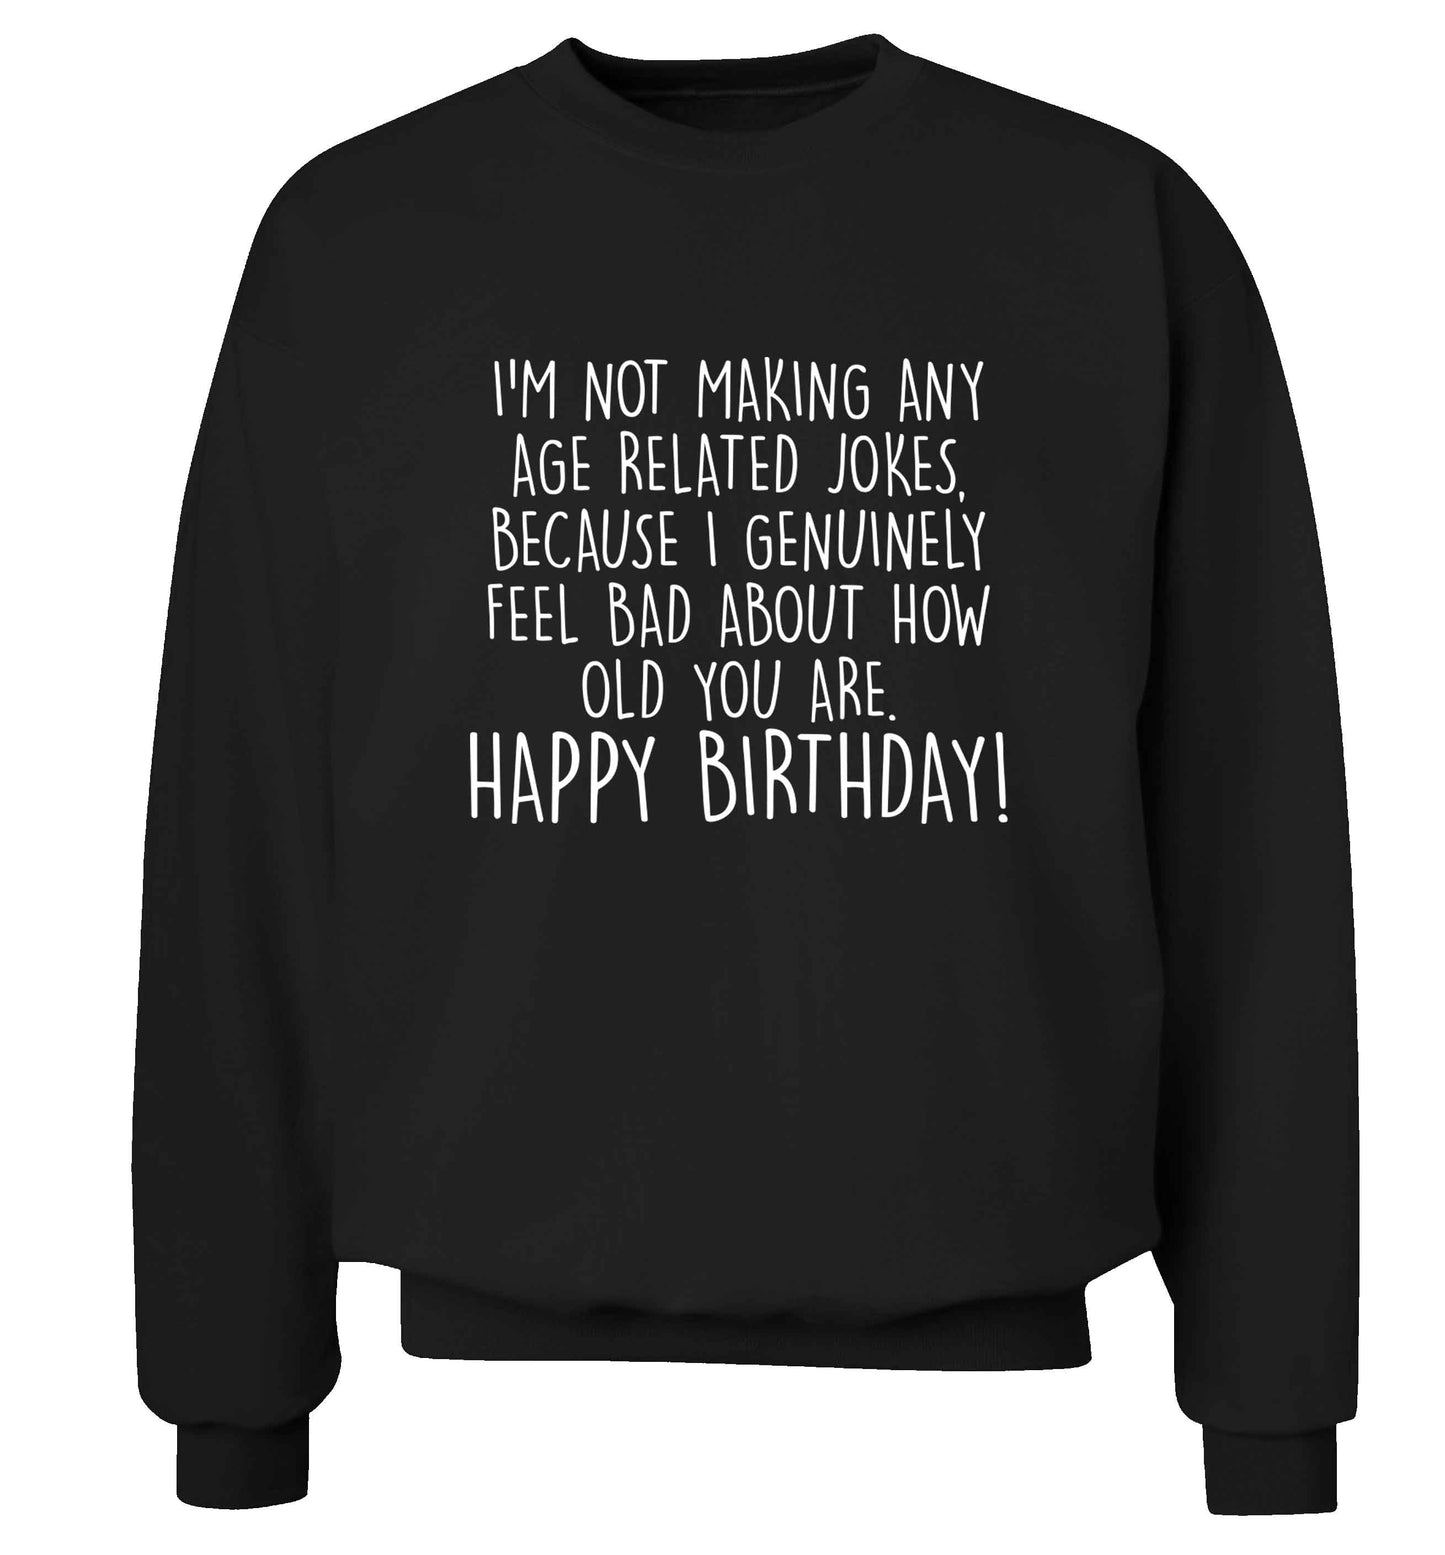 I'm not making any age related jokes because I genuinely feel bad for how old you are adult's unisex black sweater 2XL